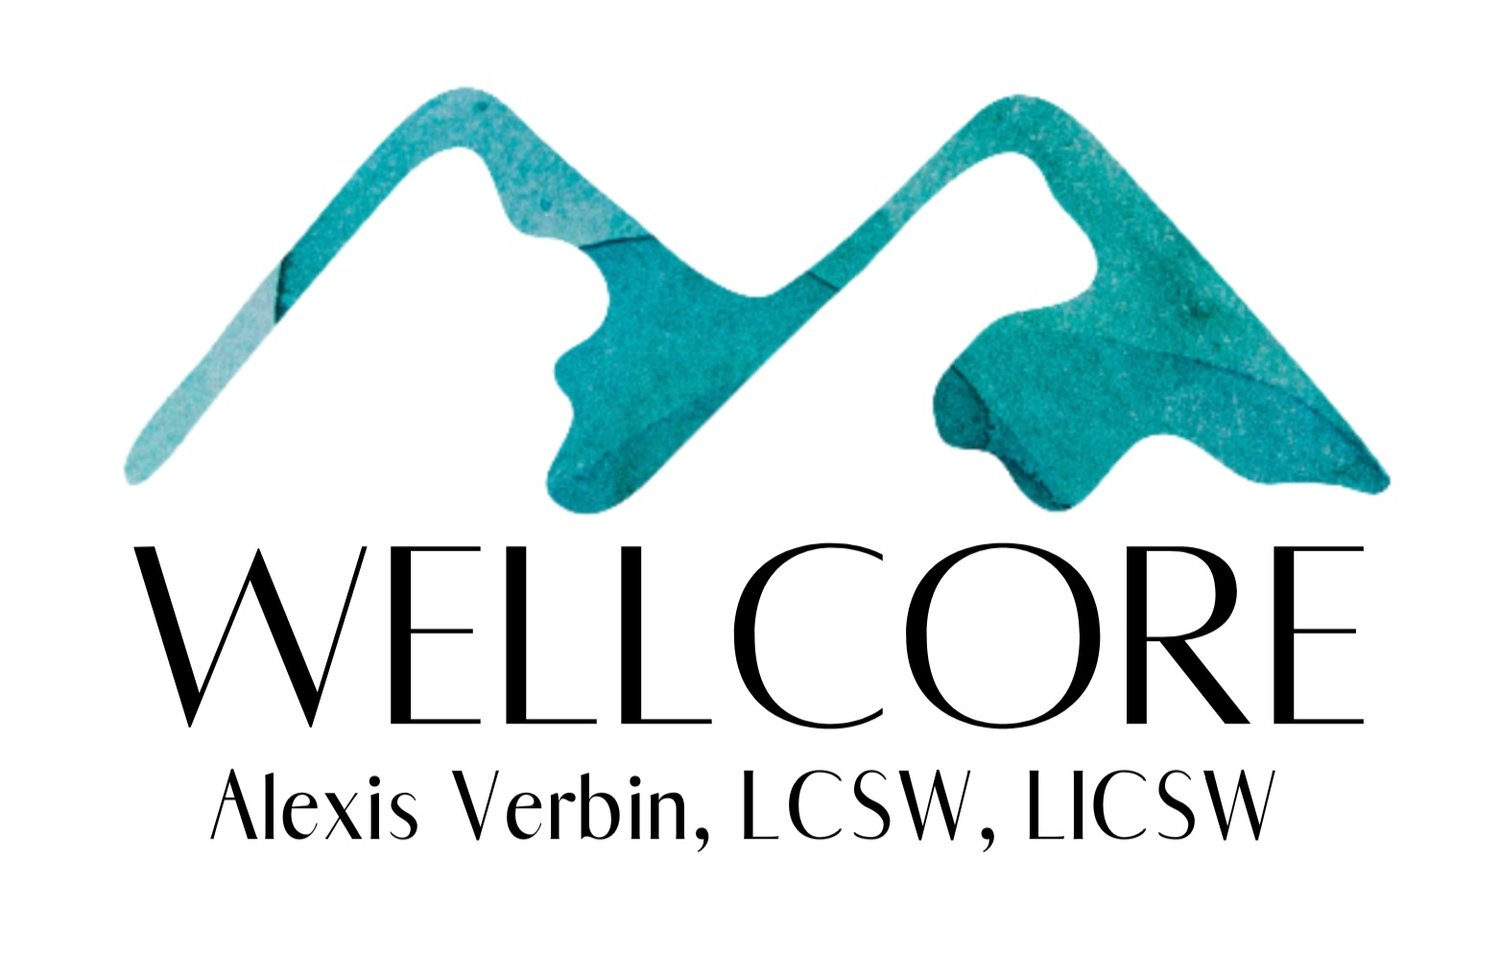 WELLCORE: Mental Health &amp; Wellness Therapy with Alexis Verbin LCSW, LICSW, Colorado, Massachusetts, Vermont, Florida